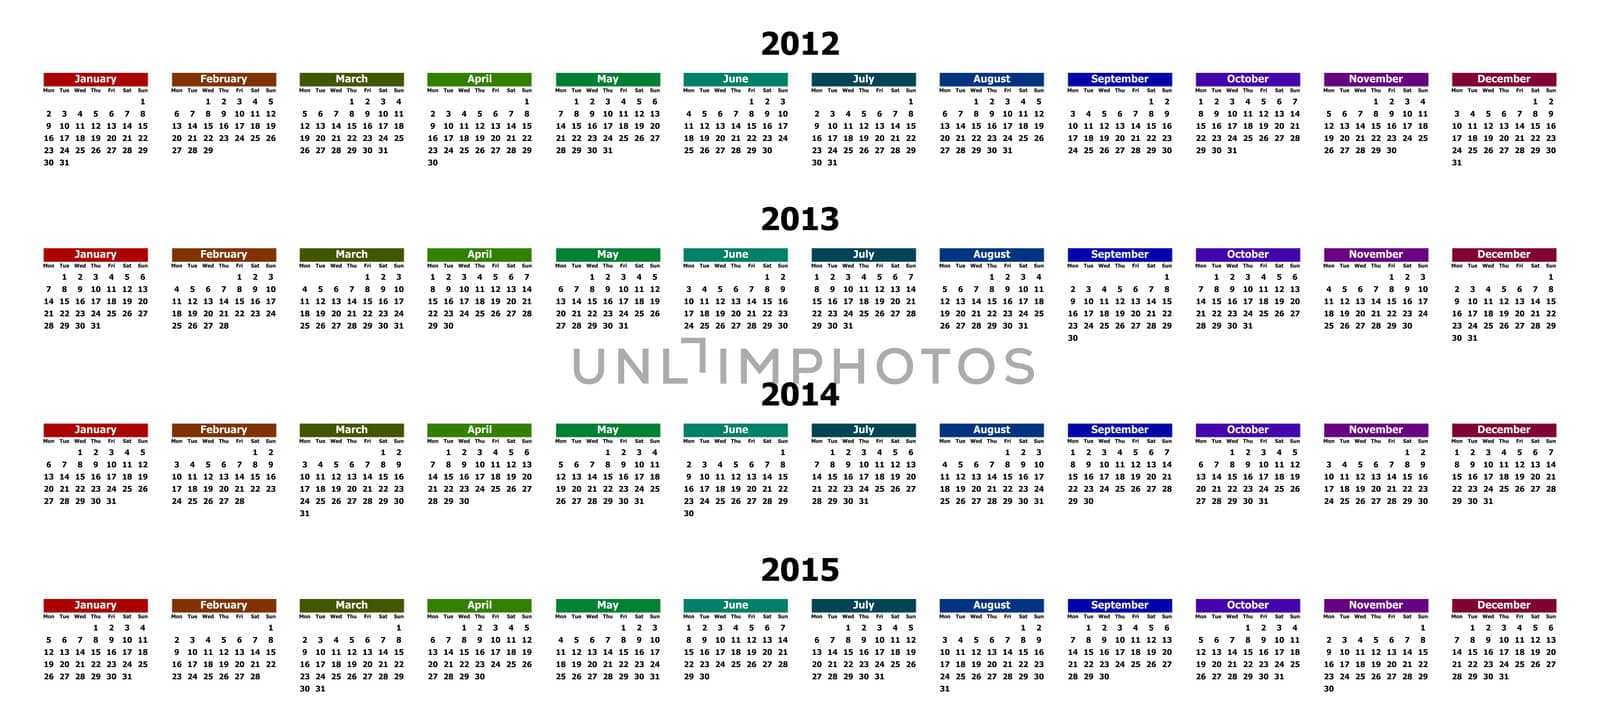 colorful calendar for years 2012 - 2015